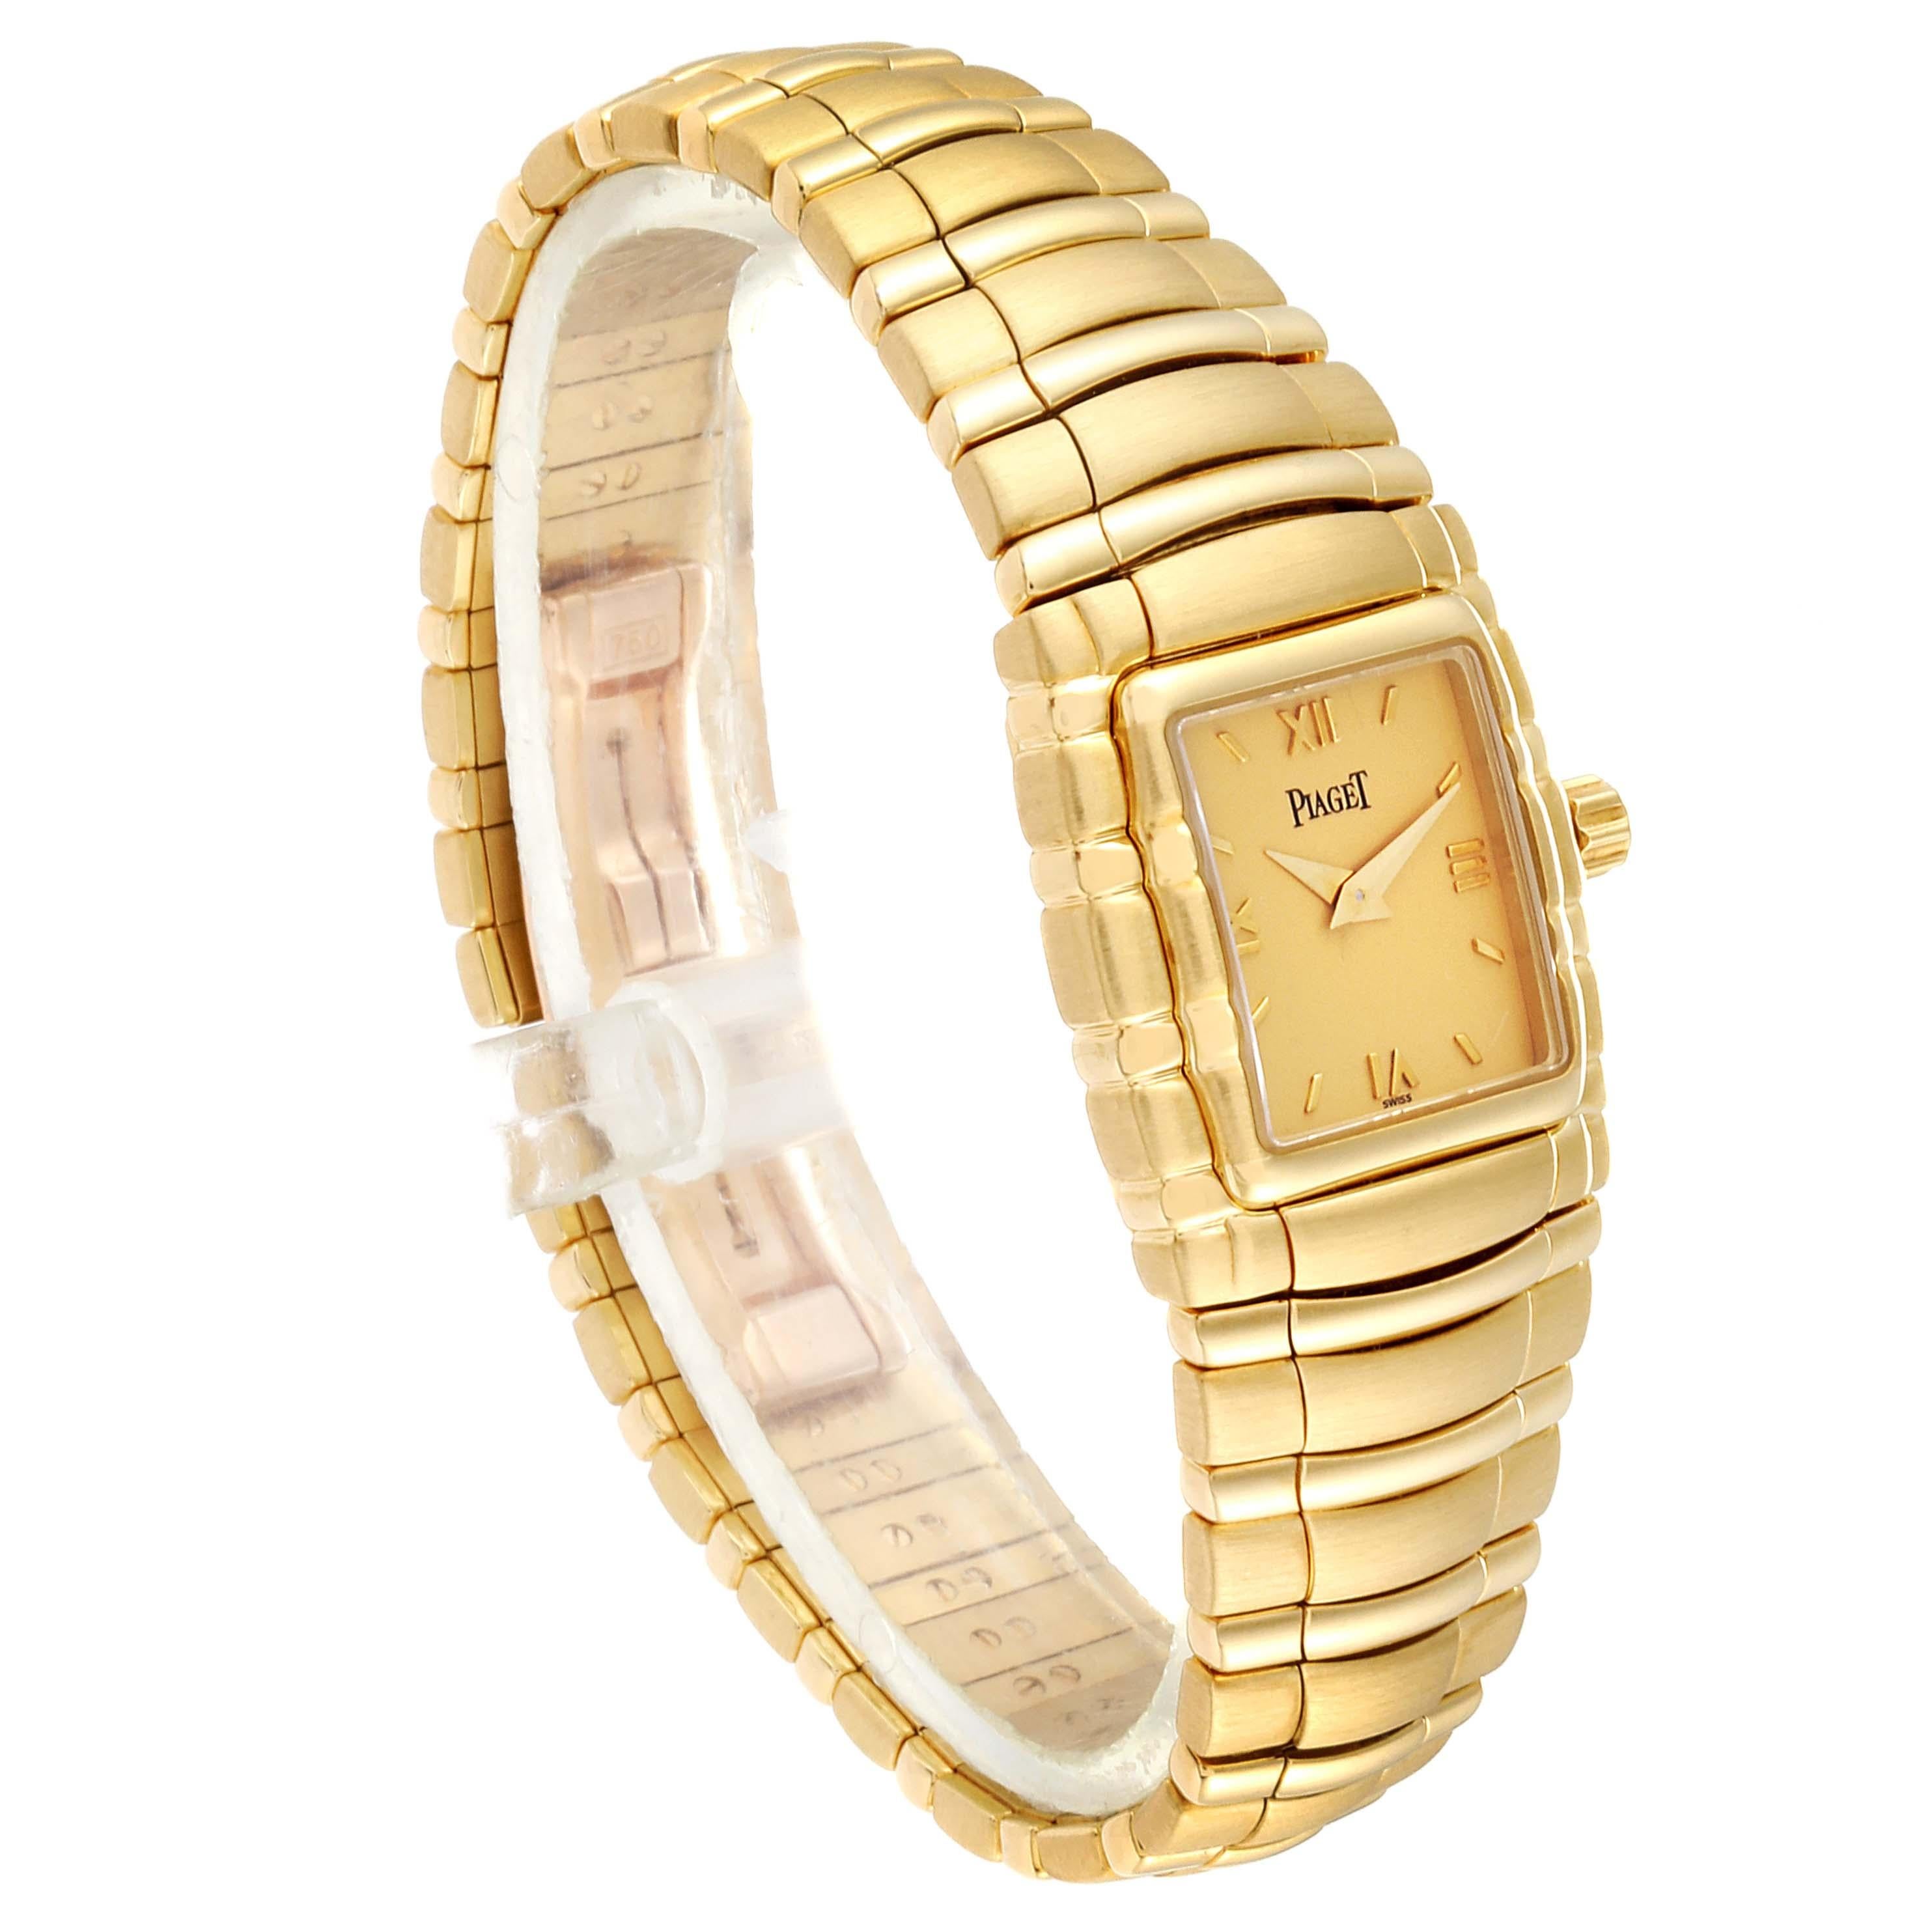 Piaget Tanagra 18 Karat Yellow Gold Mechanical Ladies Watch M411 In Excellent Condition For Sale In Atlanta, GA